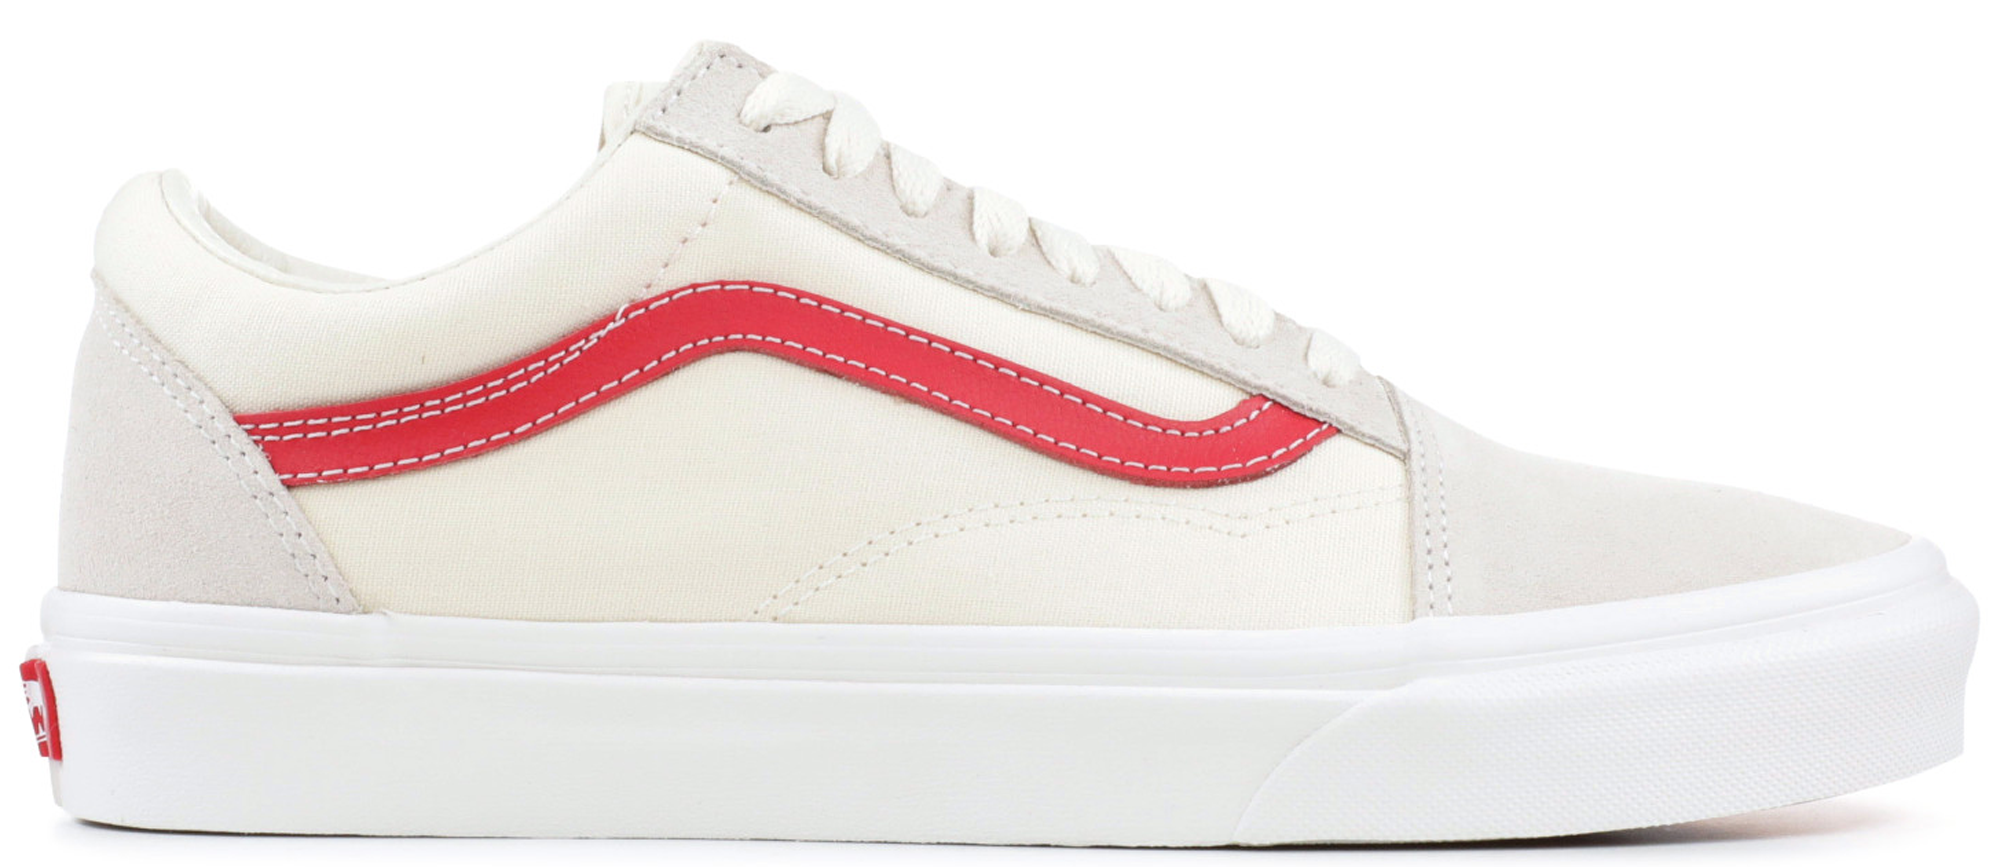 Vans Mens Old Skool - Shoes White/Red Size 10.5